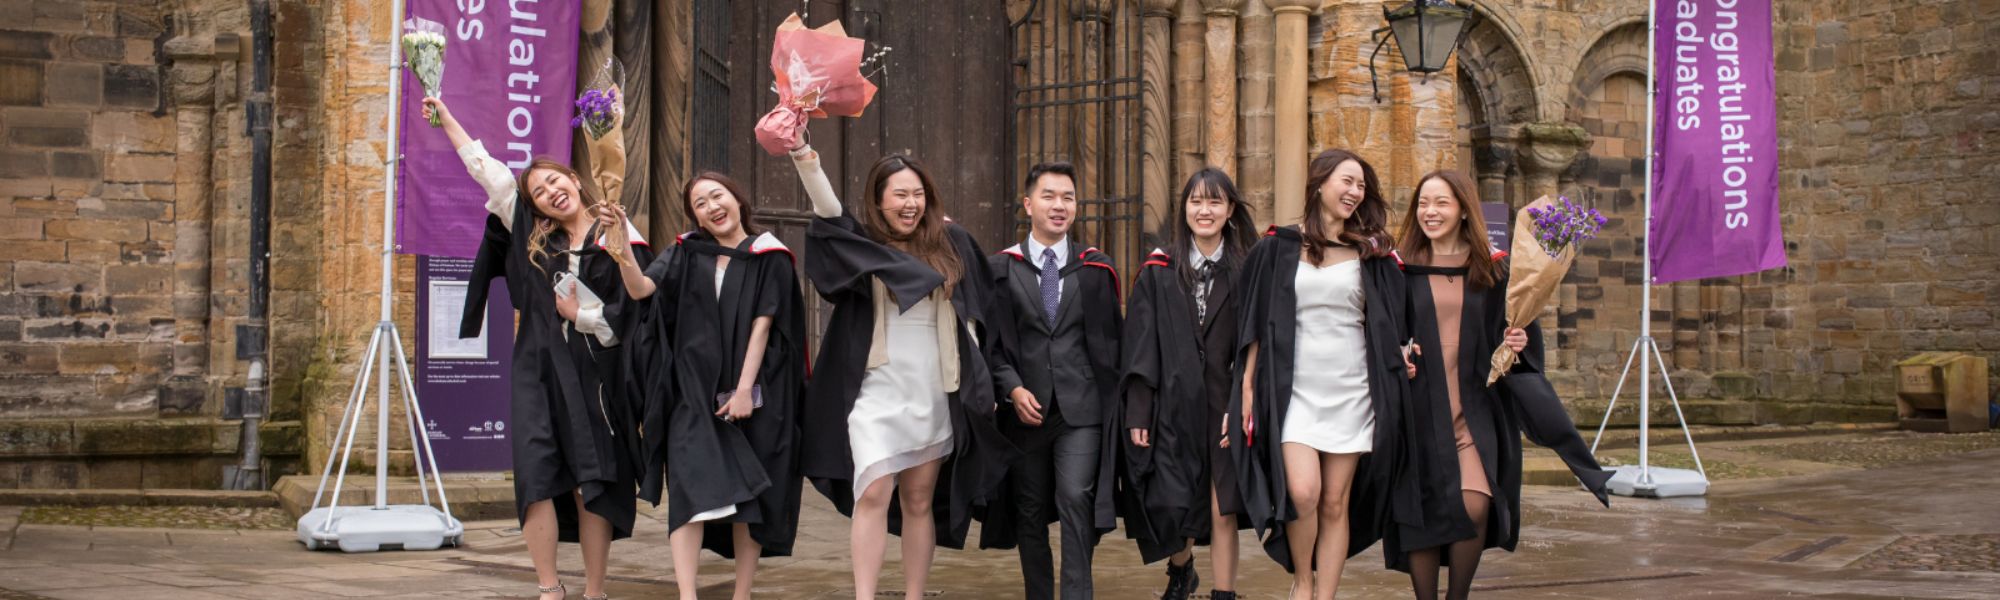 Graduates in robes celebrating in front of Durham Cathedral